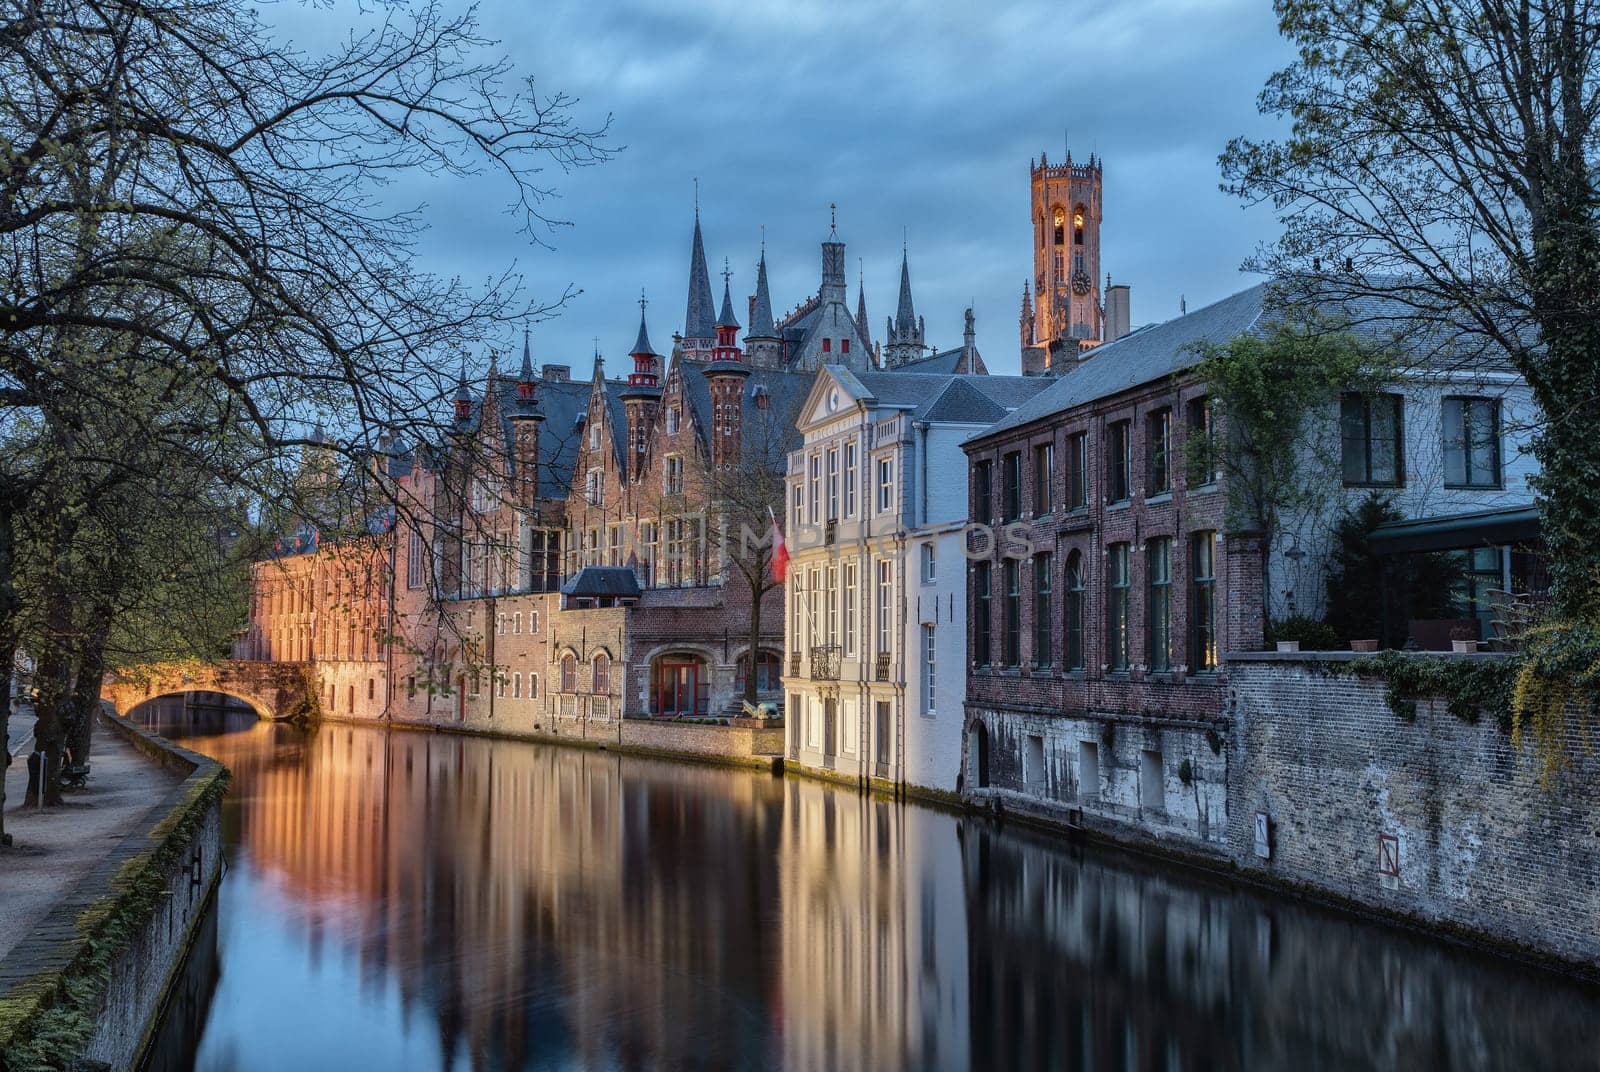 Brugge the romantic city at evening by mot1963